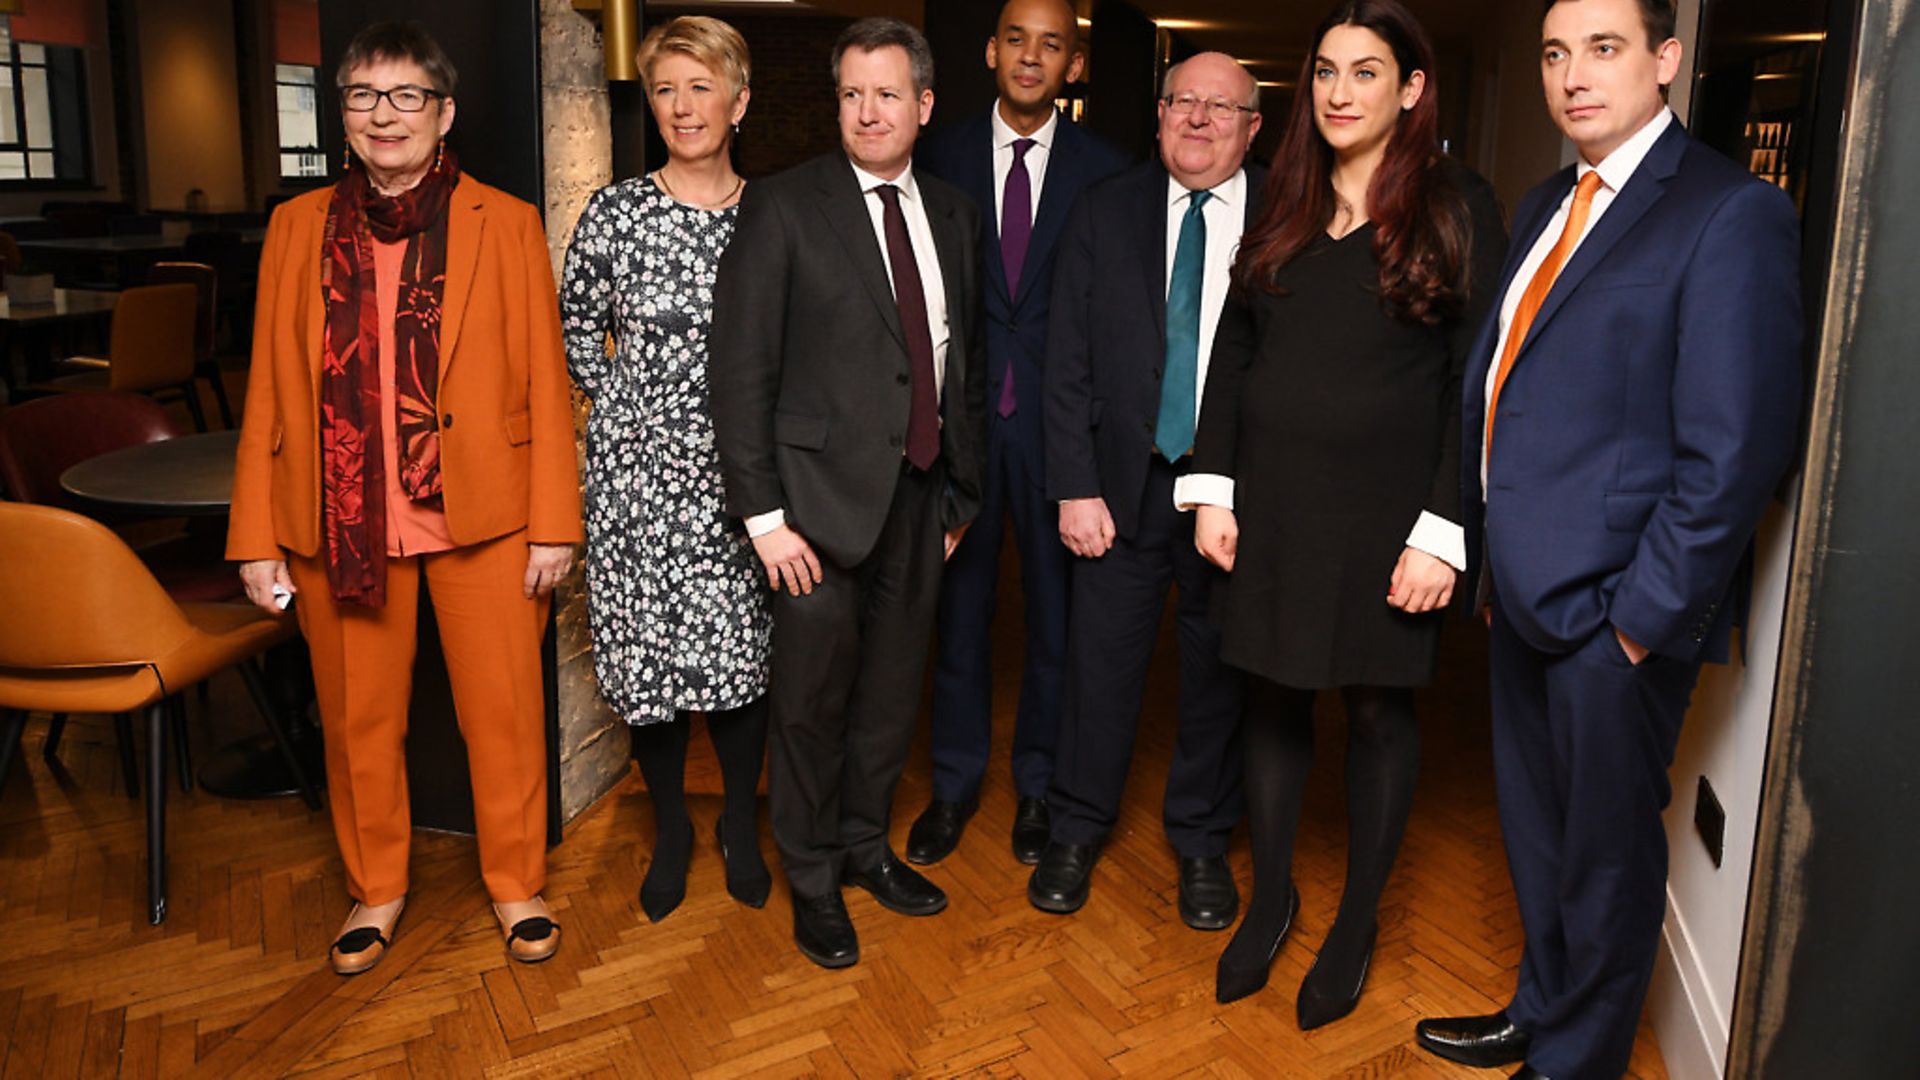 LONDON, ENGLAND - FEBRUARY 18: (L-R) Labour MP's Anne Coffey, Angela Smith, Chris Leslie, Chuka Umunna, Mike Gapes, Luciana Berger and Gavin Shuker announce their resignation from the Labour Party at a press conference on February 18, 2019 in London, England. Chuka Umunna MP along with Chris Leslie, Luciana Berger, Gavin Shuker, Angela Smith, Anne Coffey and Mike Gapes have announced they have resigned from the Labour Party and will sit in the House of Commons as The Independent Group of Members of Parliament. (Photo by Leon Neal/Getty Images) - Credit: Getty Images